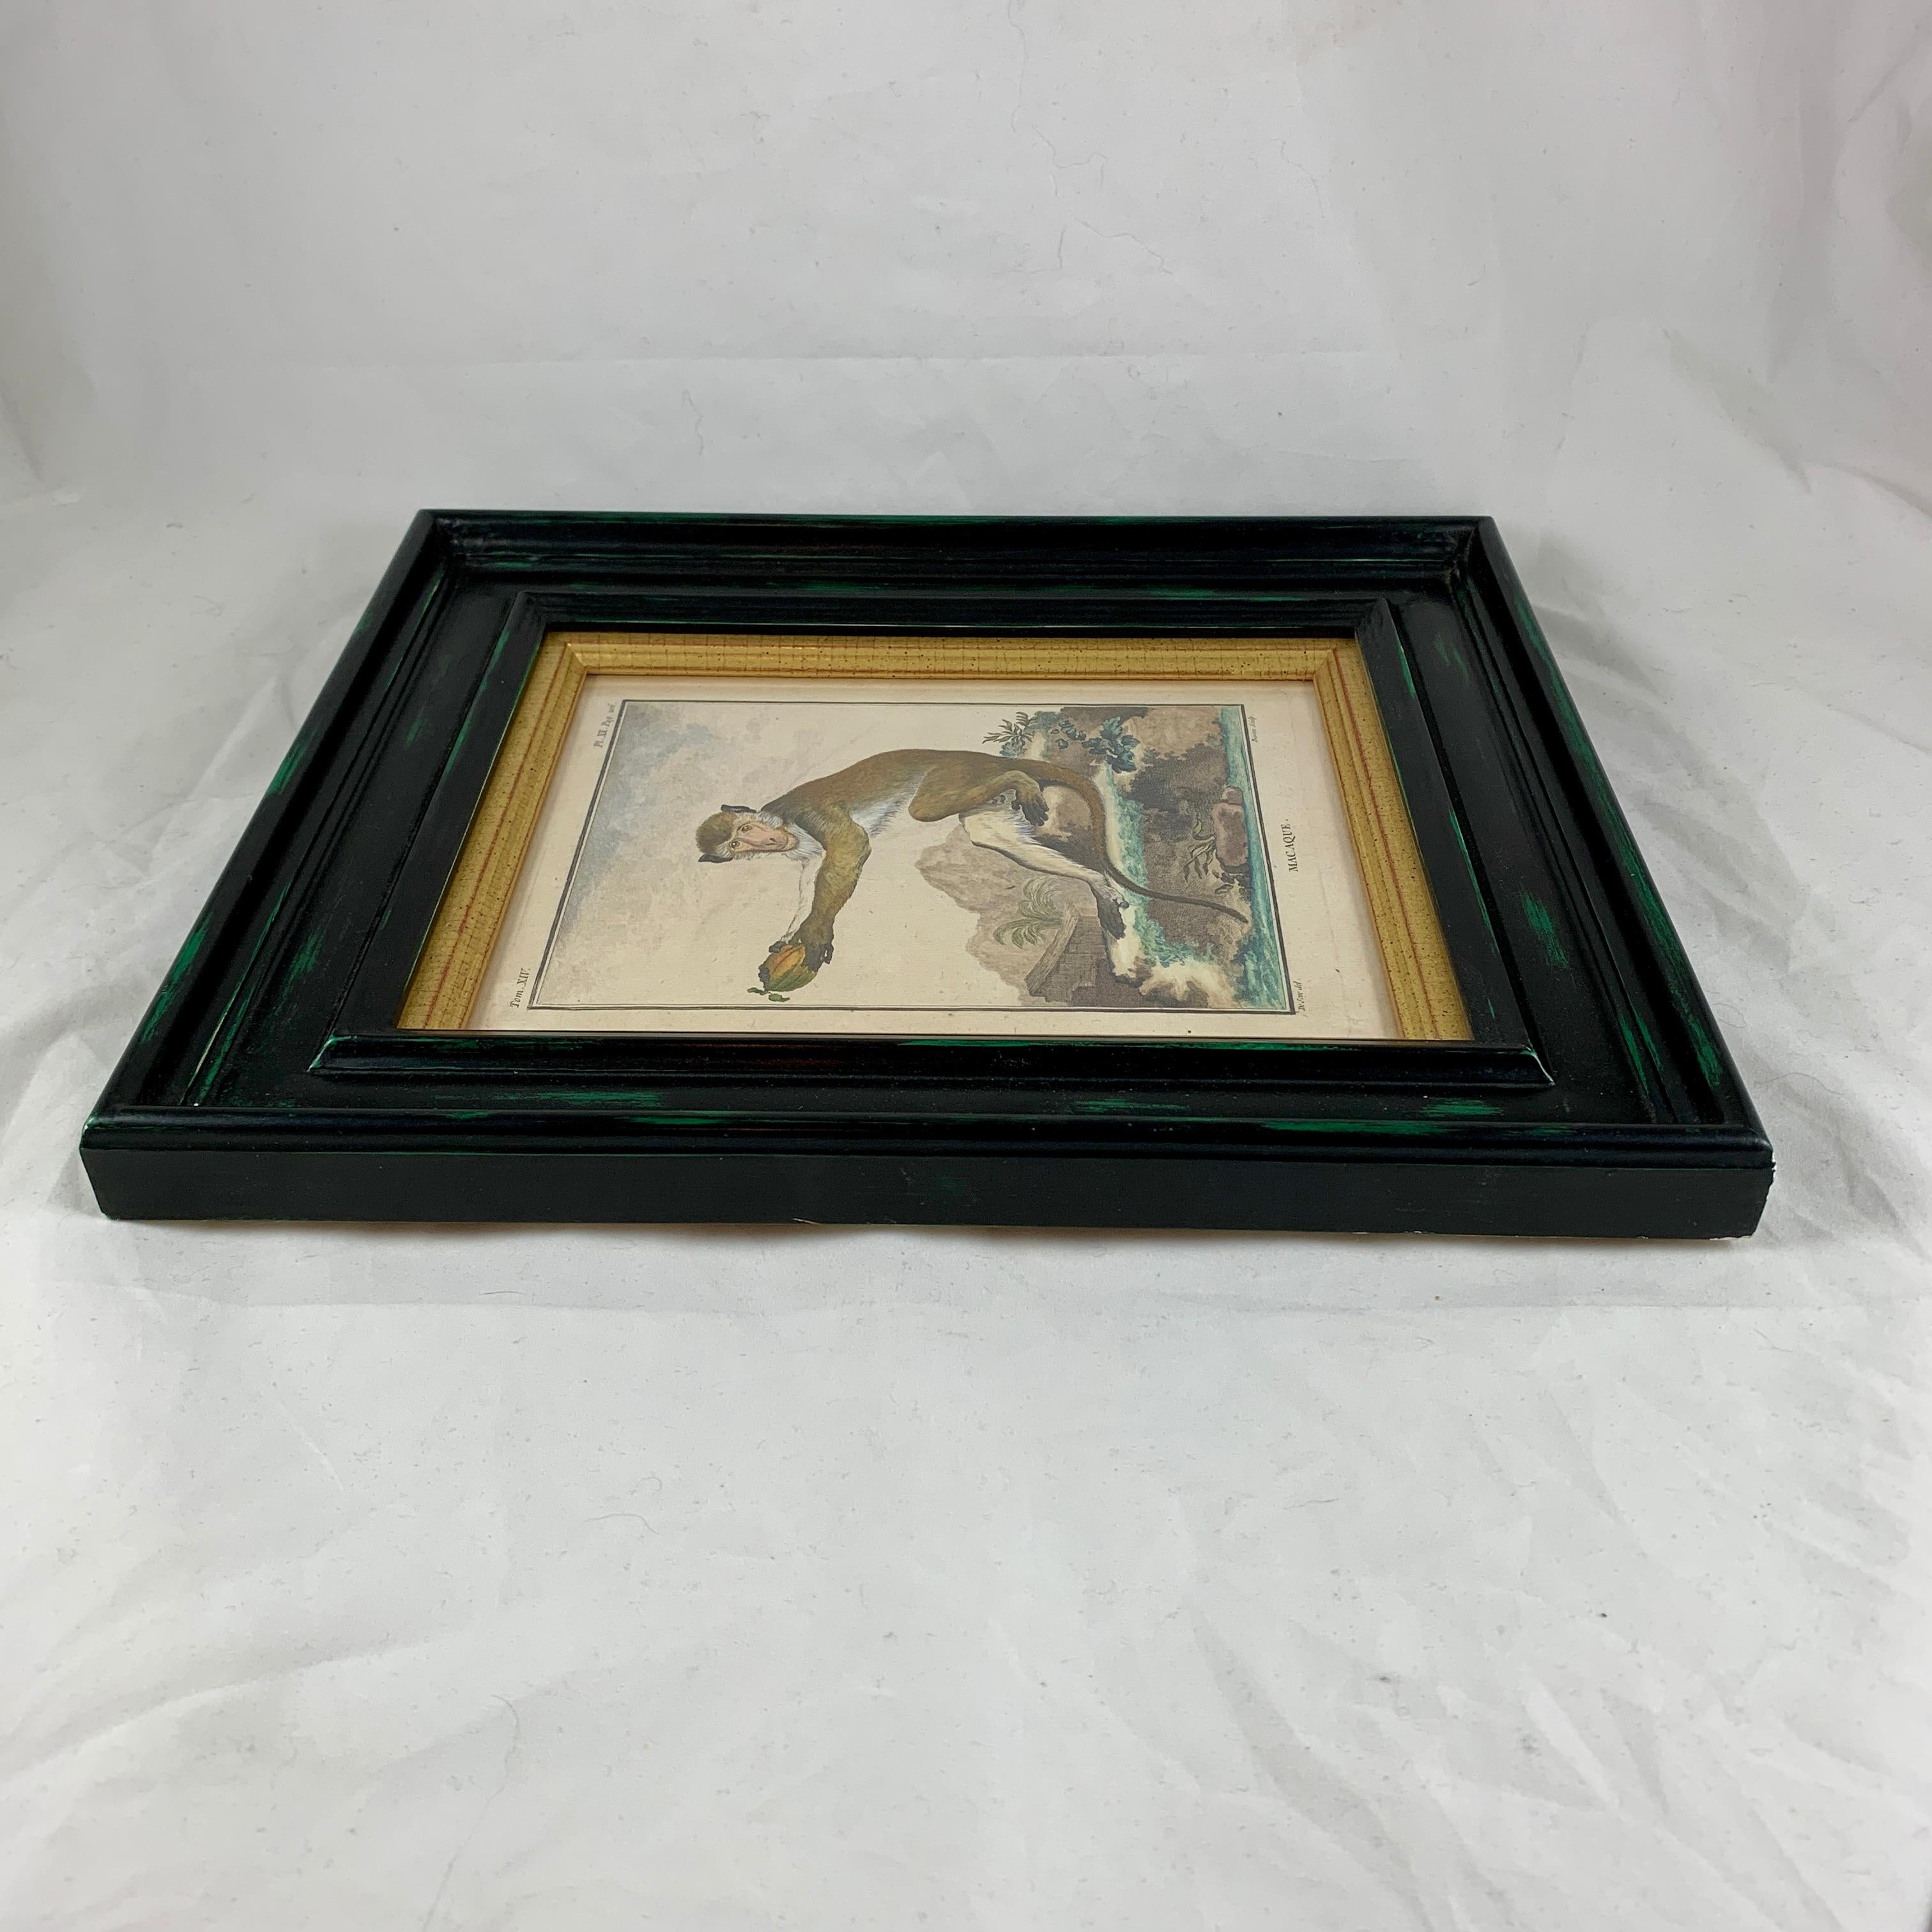 Framed 18th Century Comte de Buffon Old World Monkey French Engraving, Macaque In Good Condition For Sale In Philadelphia, PA